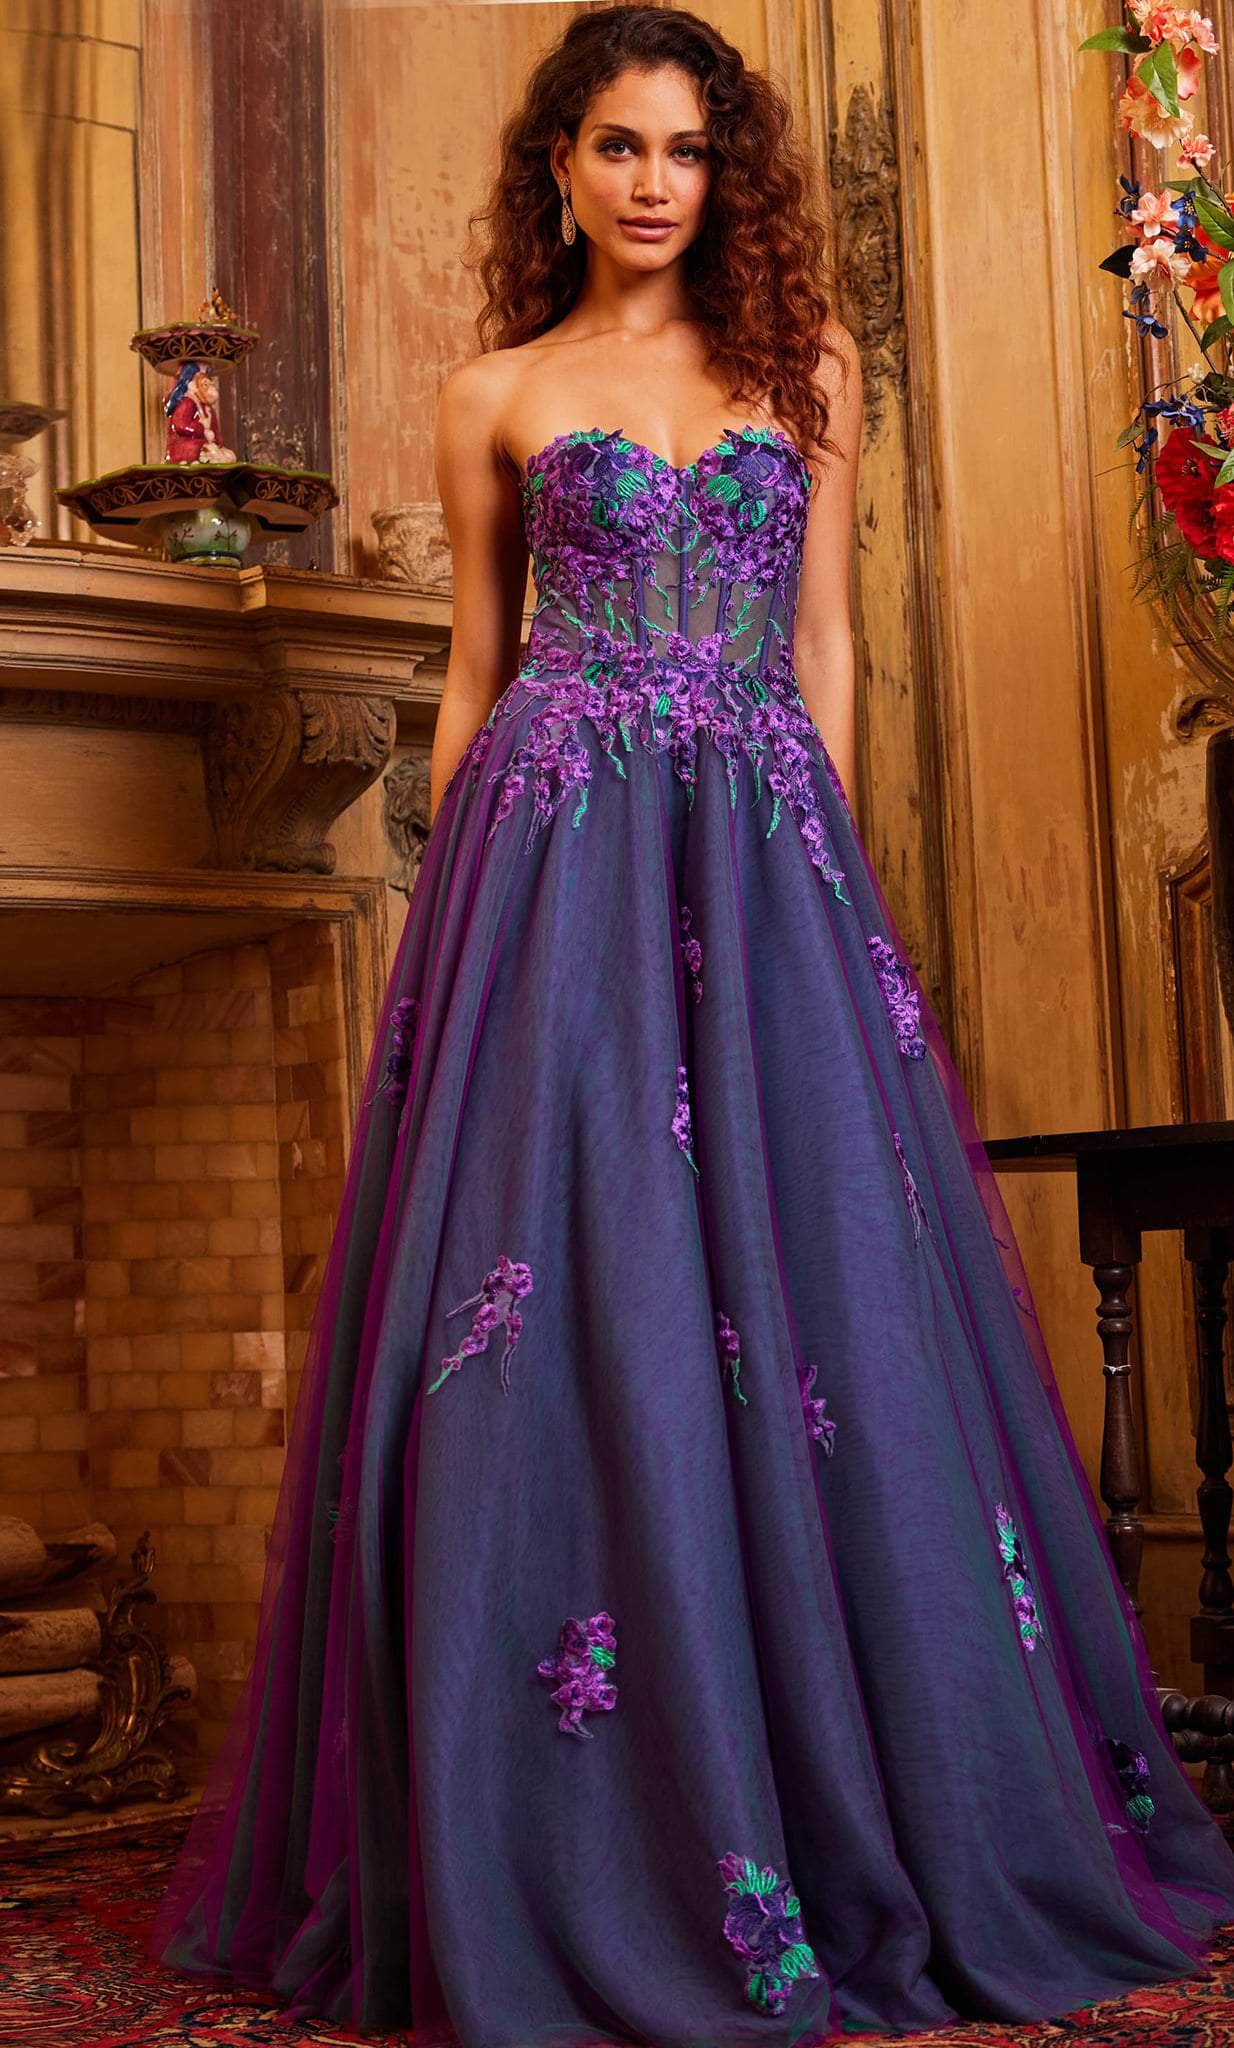 Image of Jovani 23578 - Strapless Floral Lace Plus Size Prom Gown